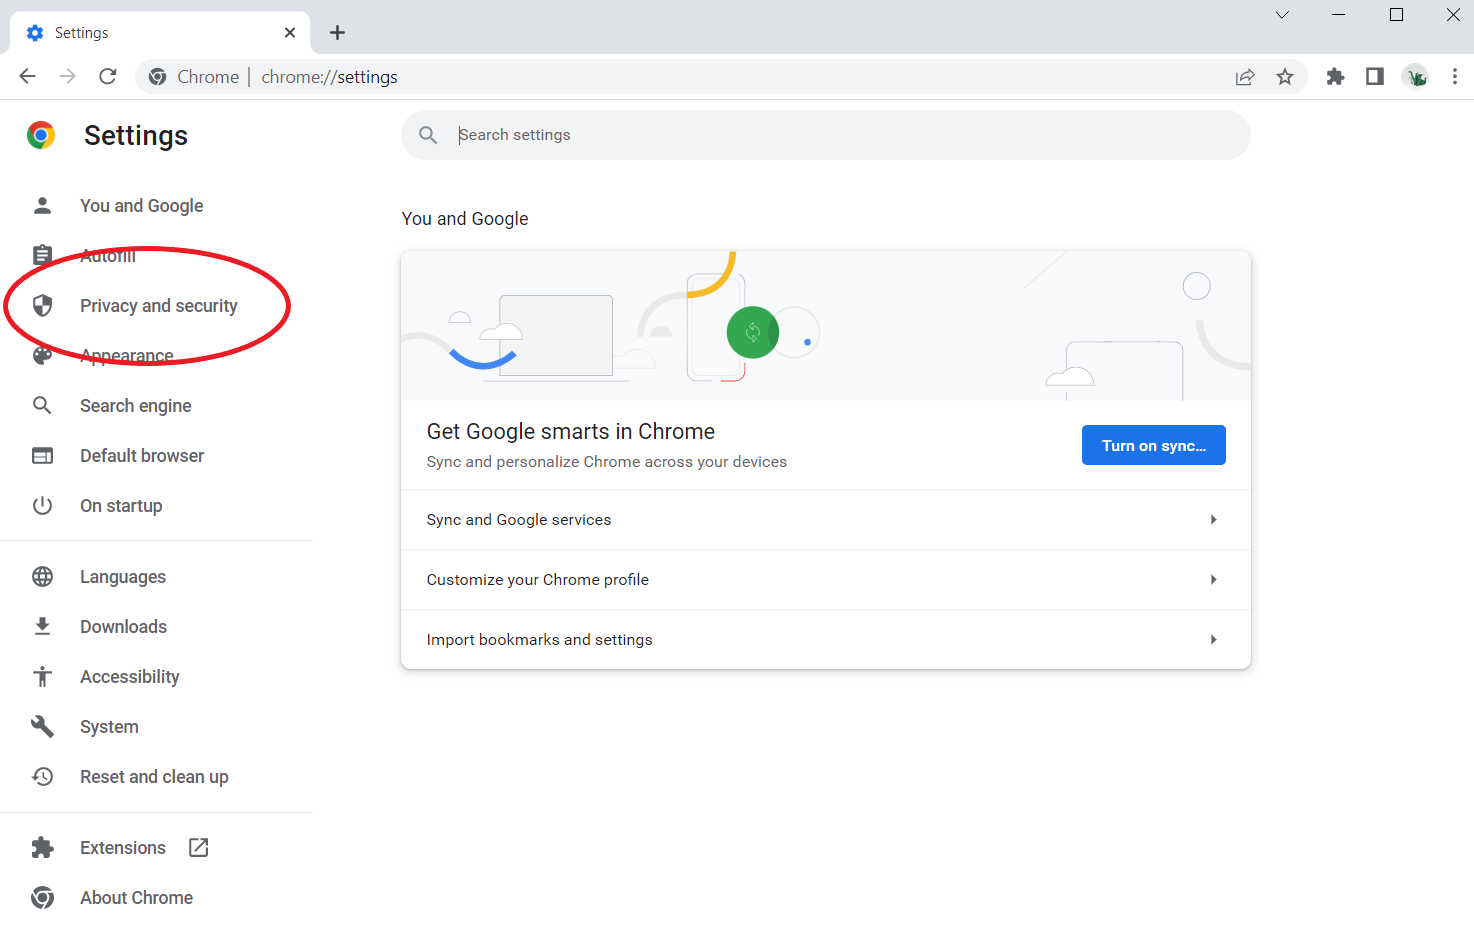 Screenshot of the Google Chrome Settings screen with the Privacy and security option circled in red.